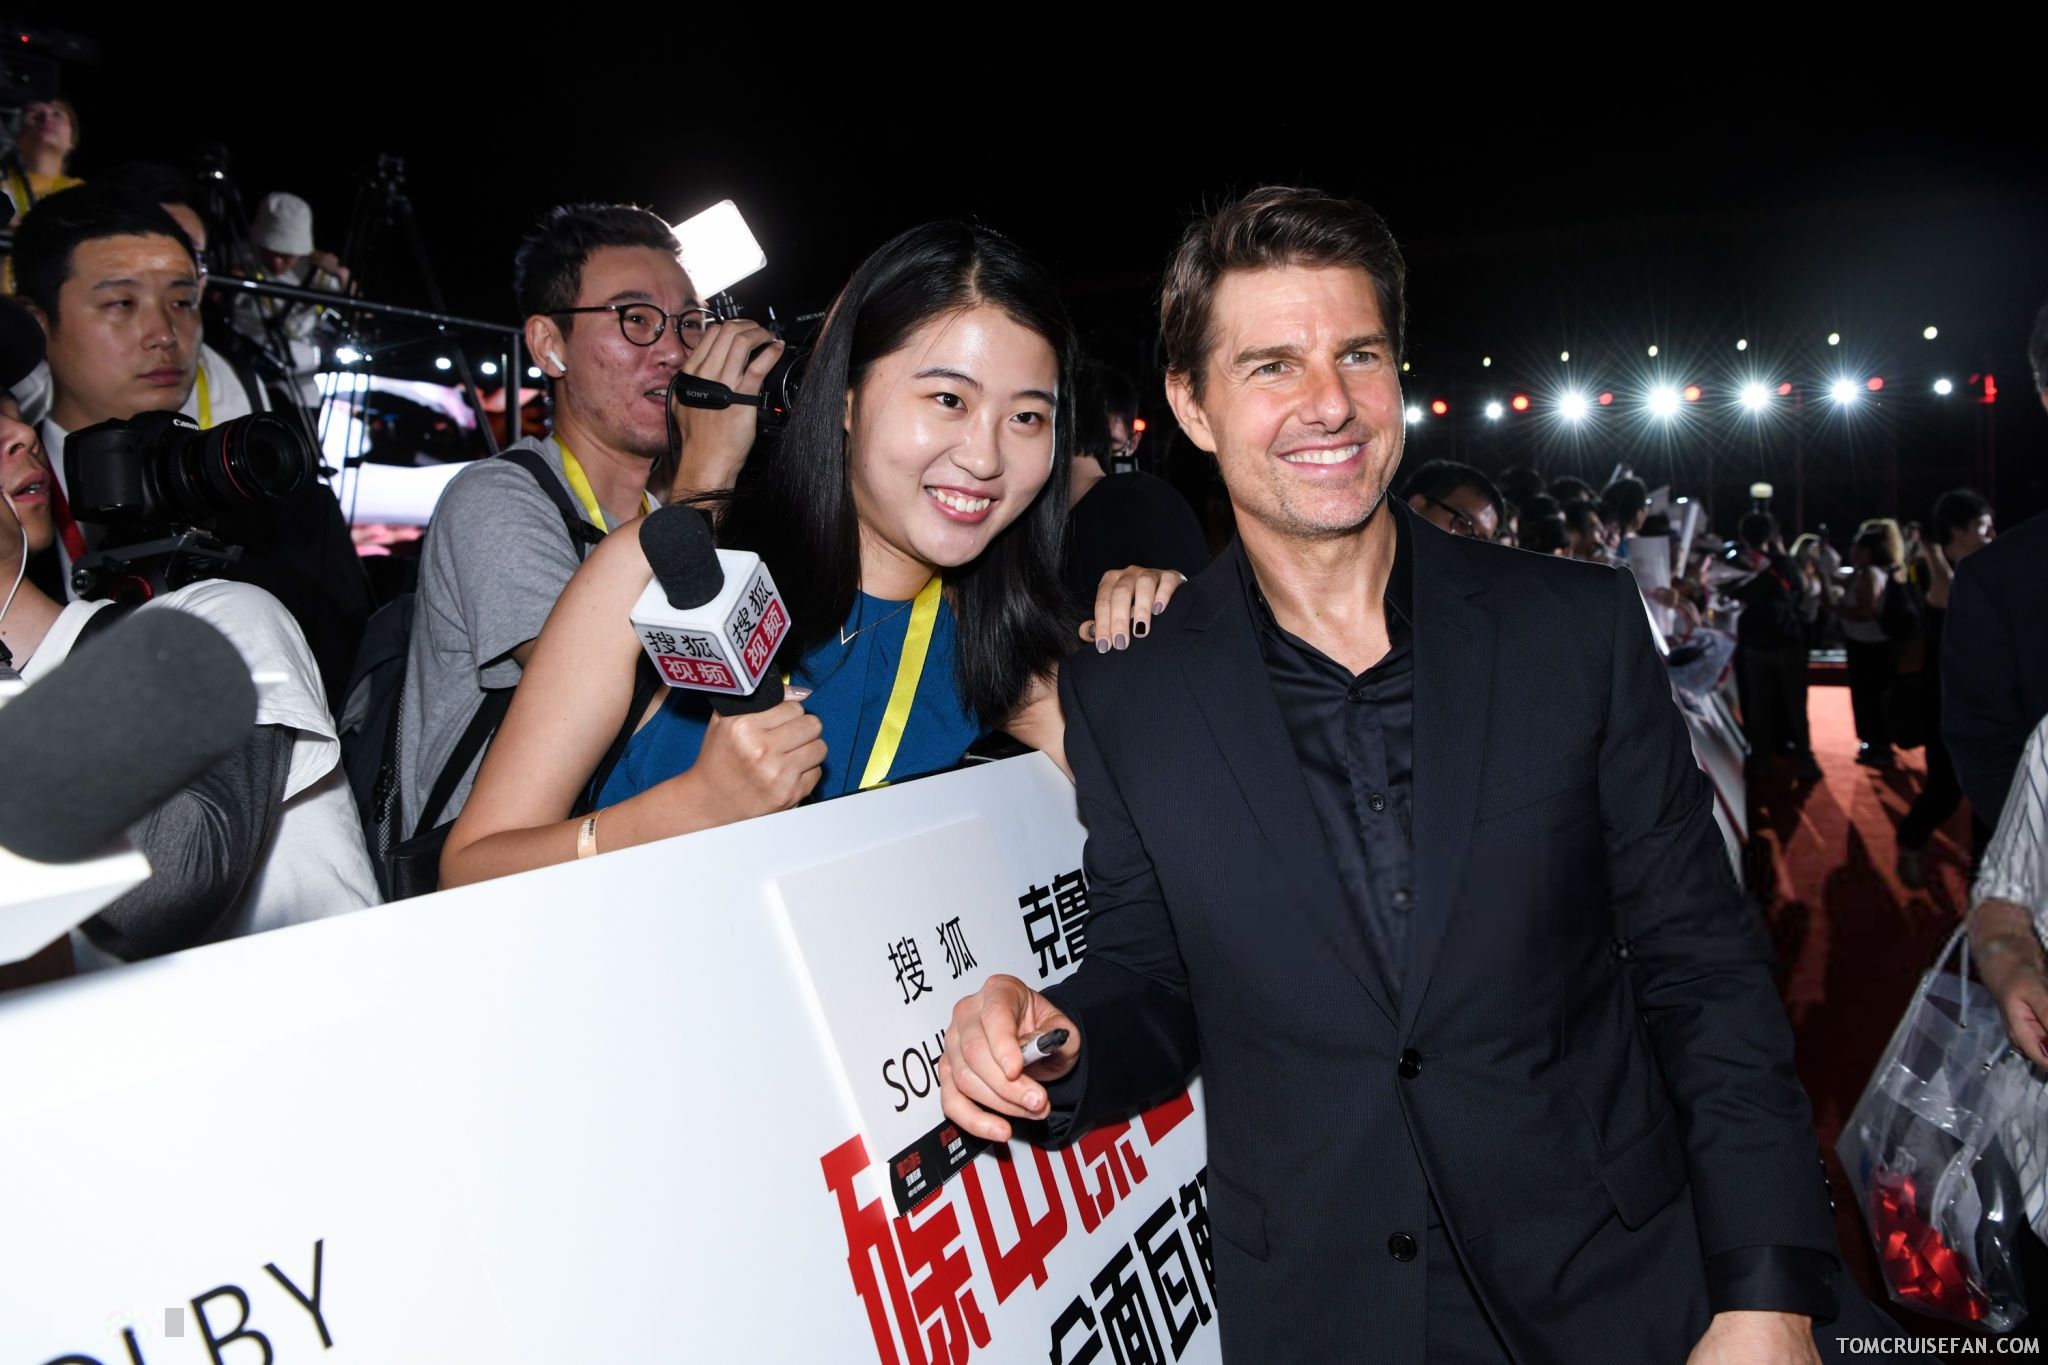 2018-08-29-Mission-Impossible-Fallout-Beijing-Premiere-024.jpg